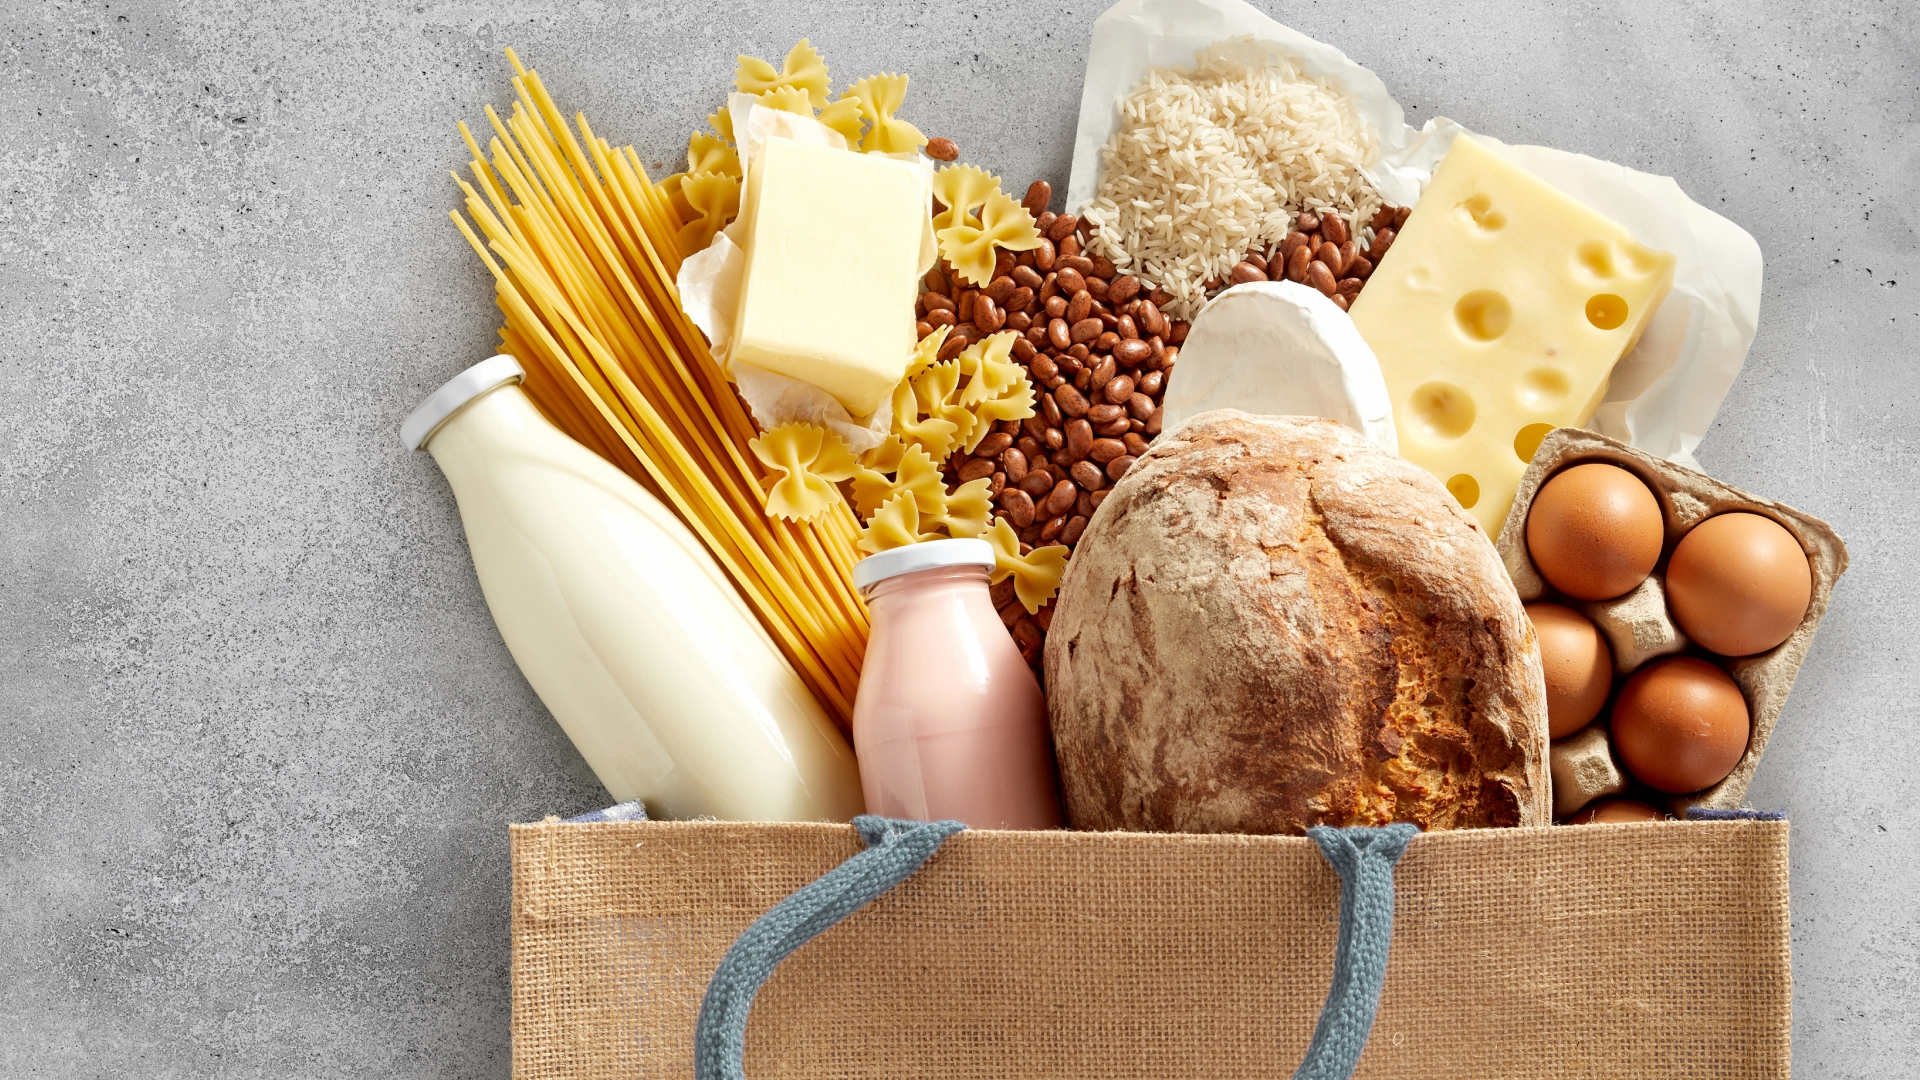 A shopping bag bursting with foods including milk, pasta, fresh bread, eggs, cheese and rice